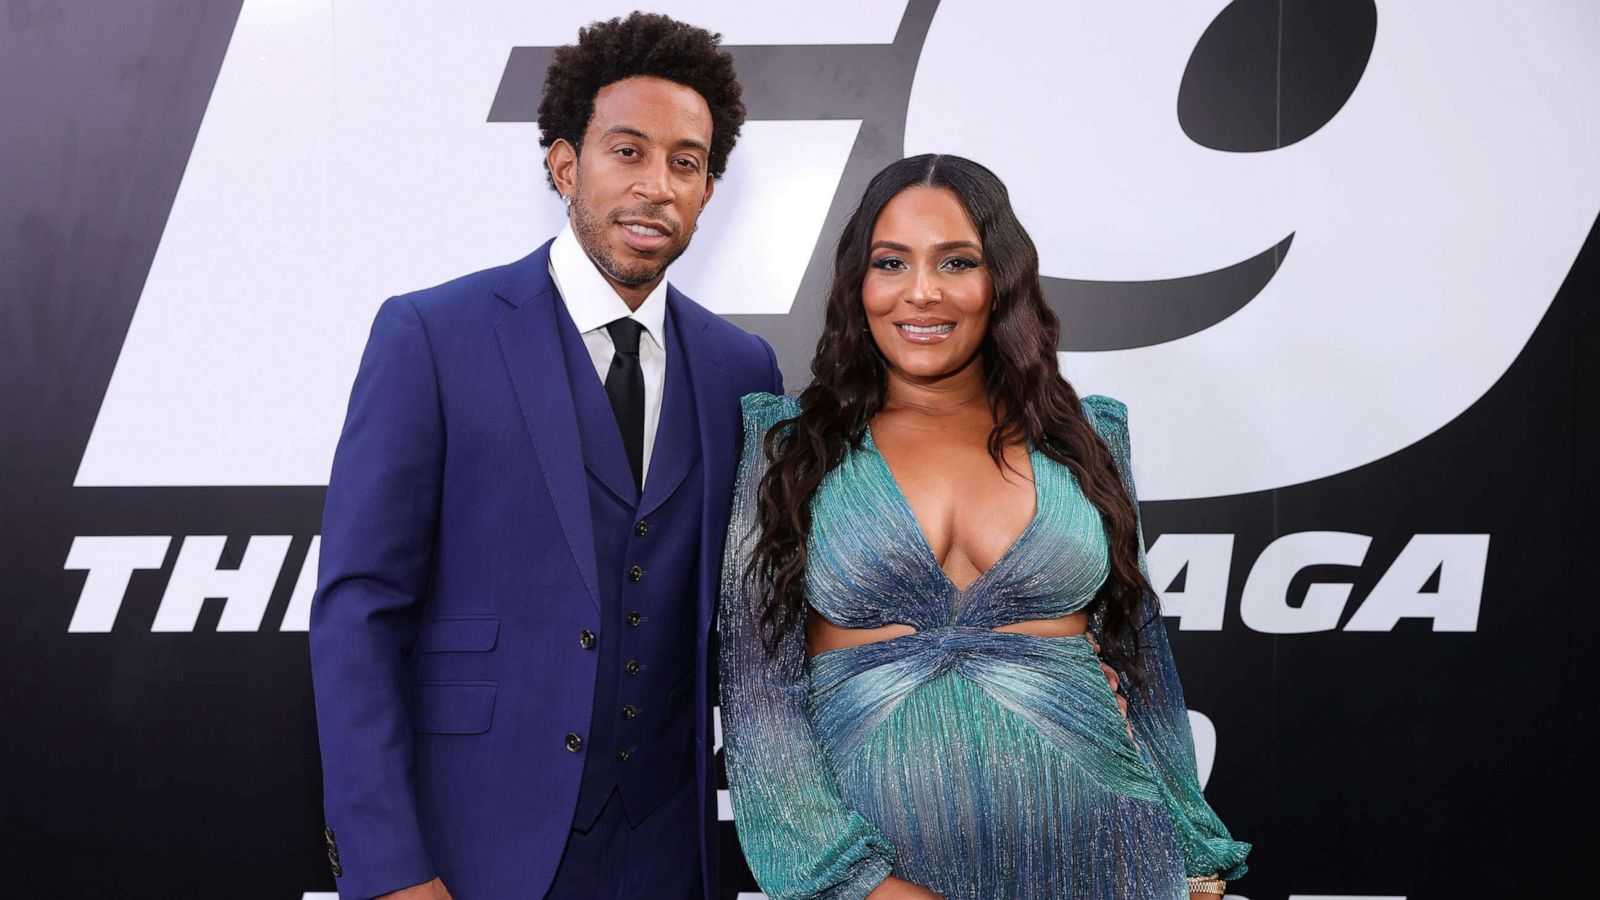 PHOTO: Ludacris and Eudoxie Mbouguiengue at TCL Chinese Theatre on June 18, 2021 in Hollywood, Calif.